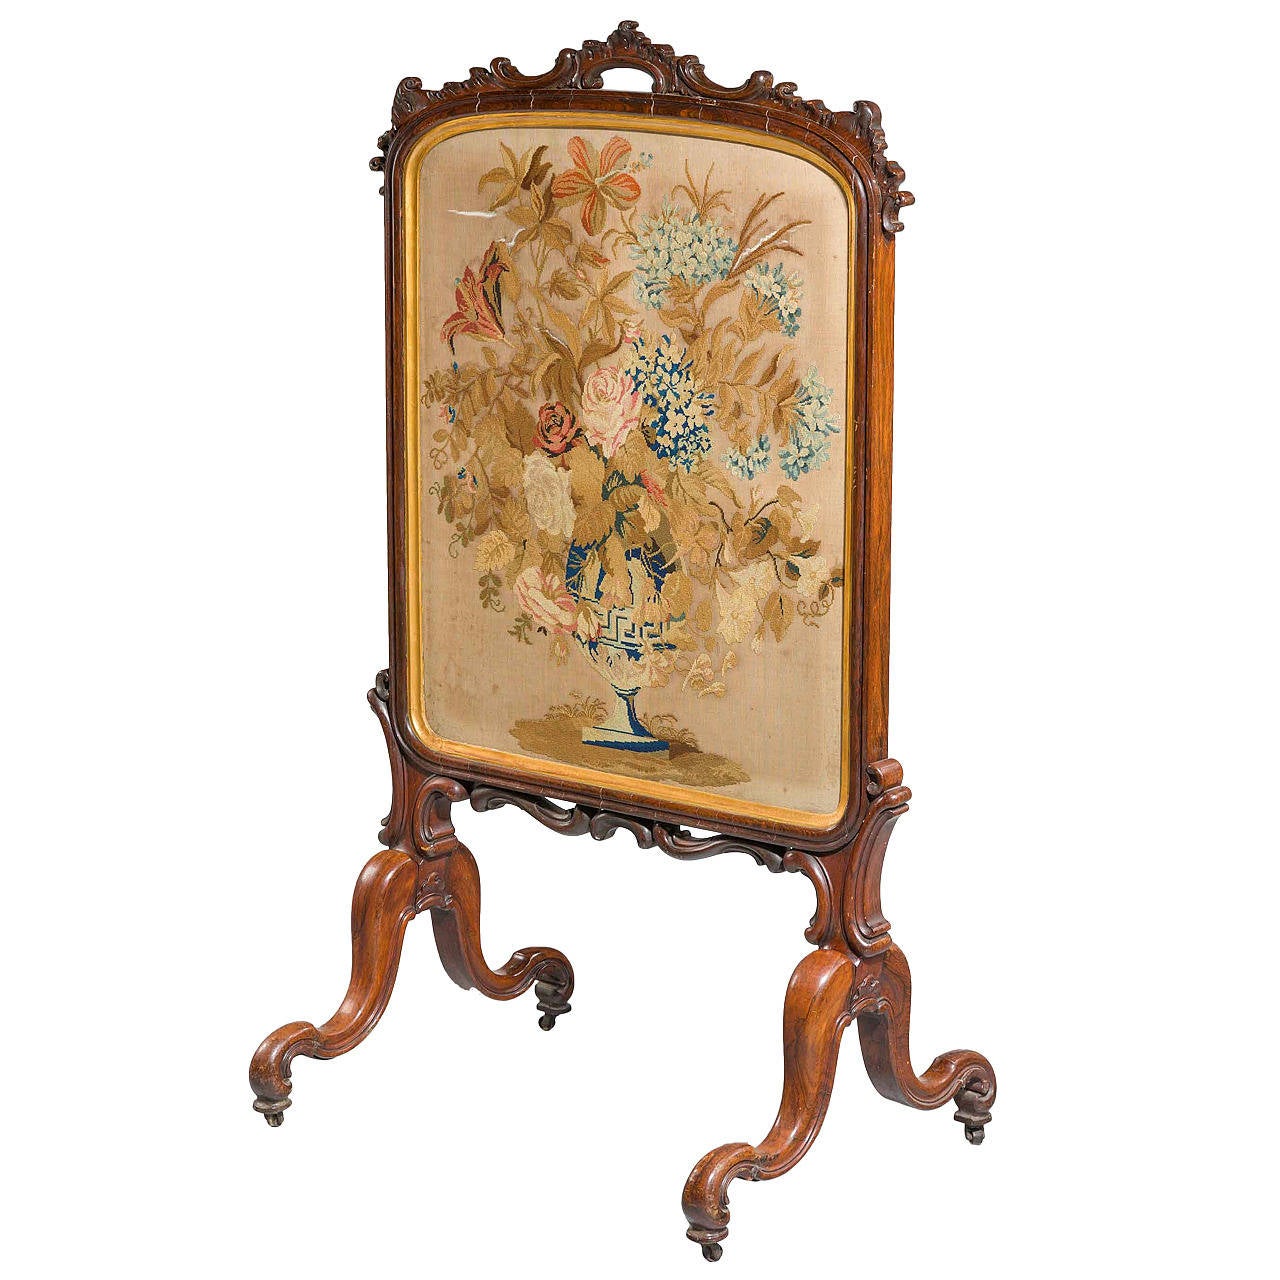 Mid-19th Century Fine Rosewood Fire Screen For Sale at 1stdibs